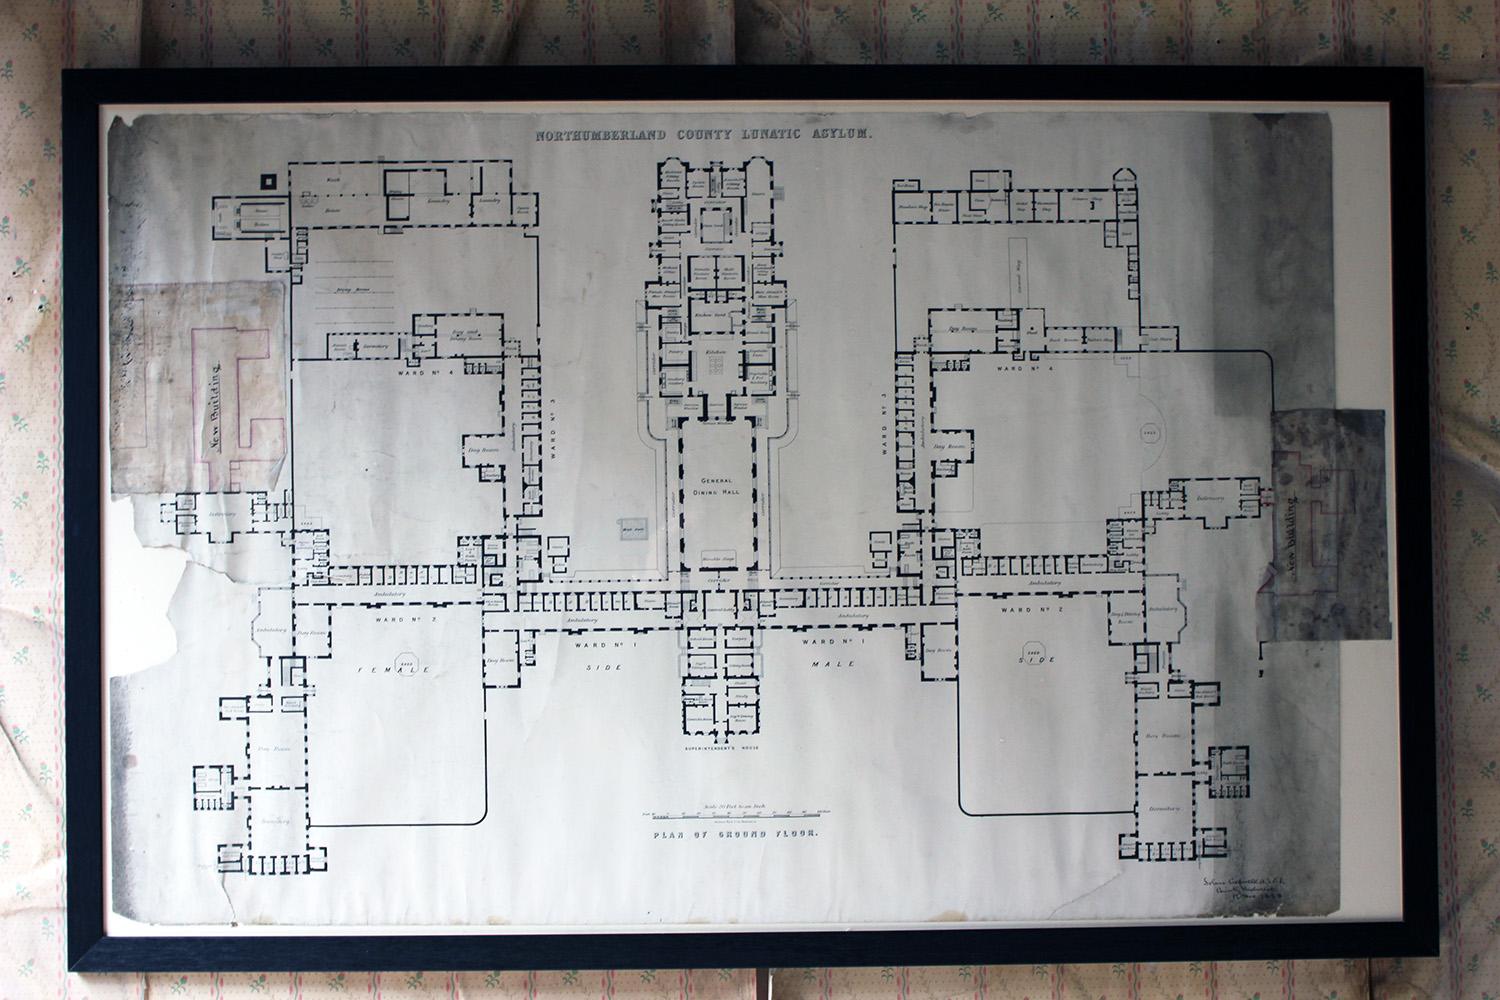 Large Victorian Architect’s Site Plan for Northumberland County Lunatic Asylum 7